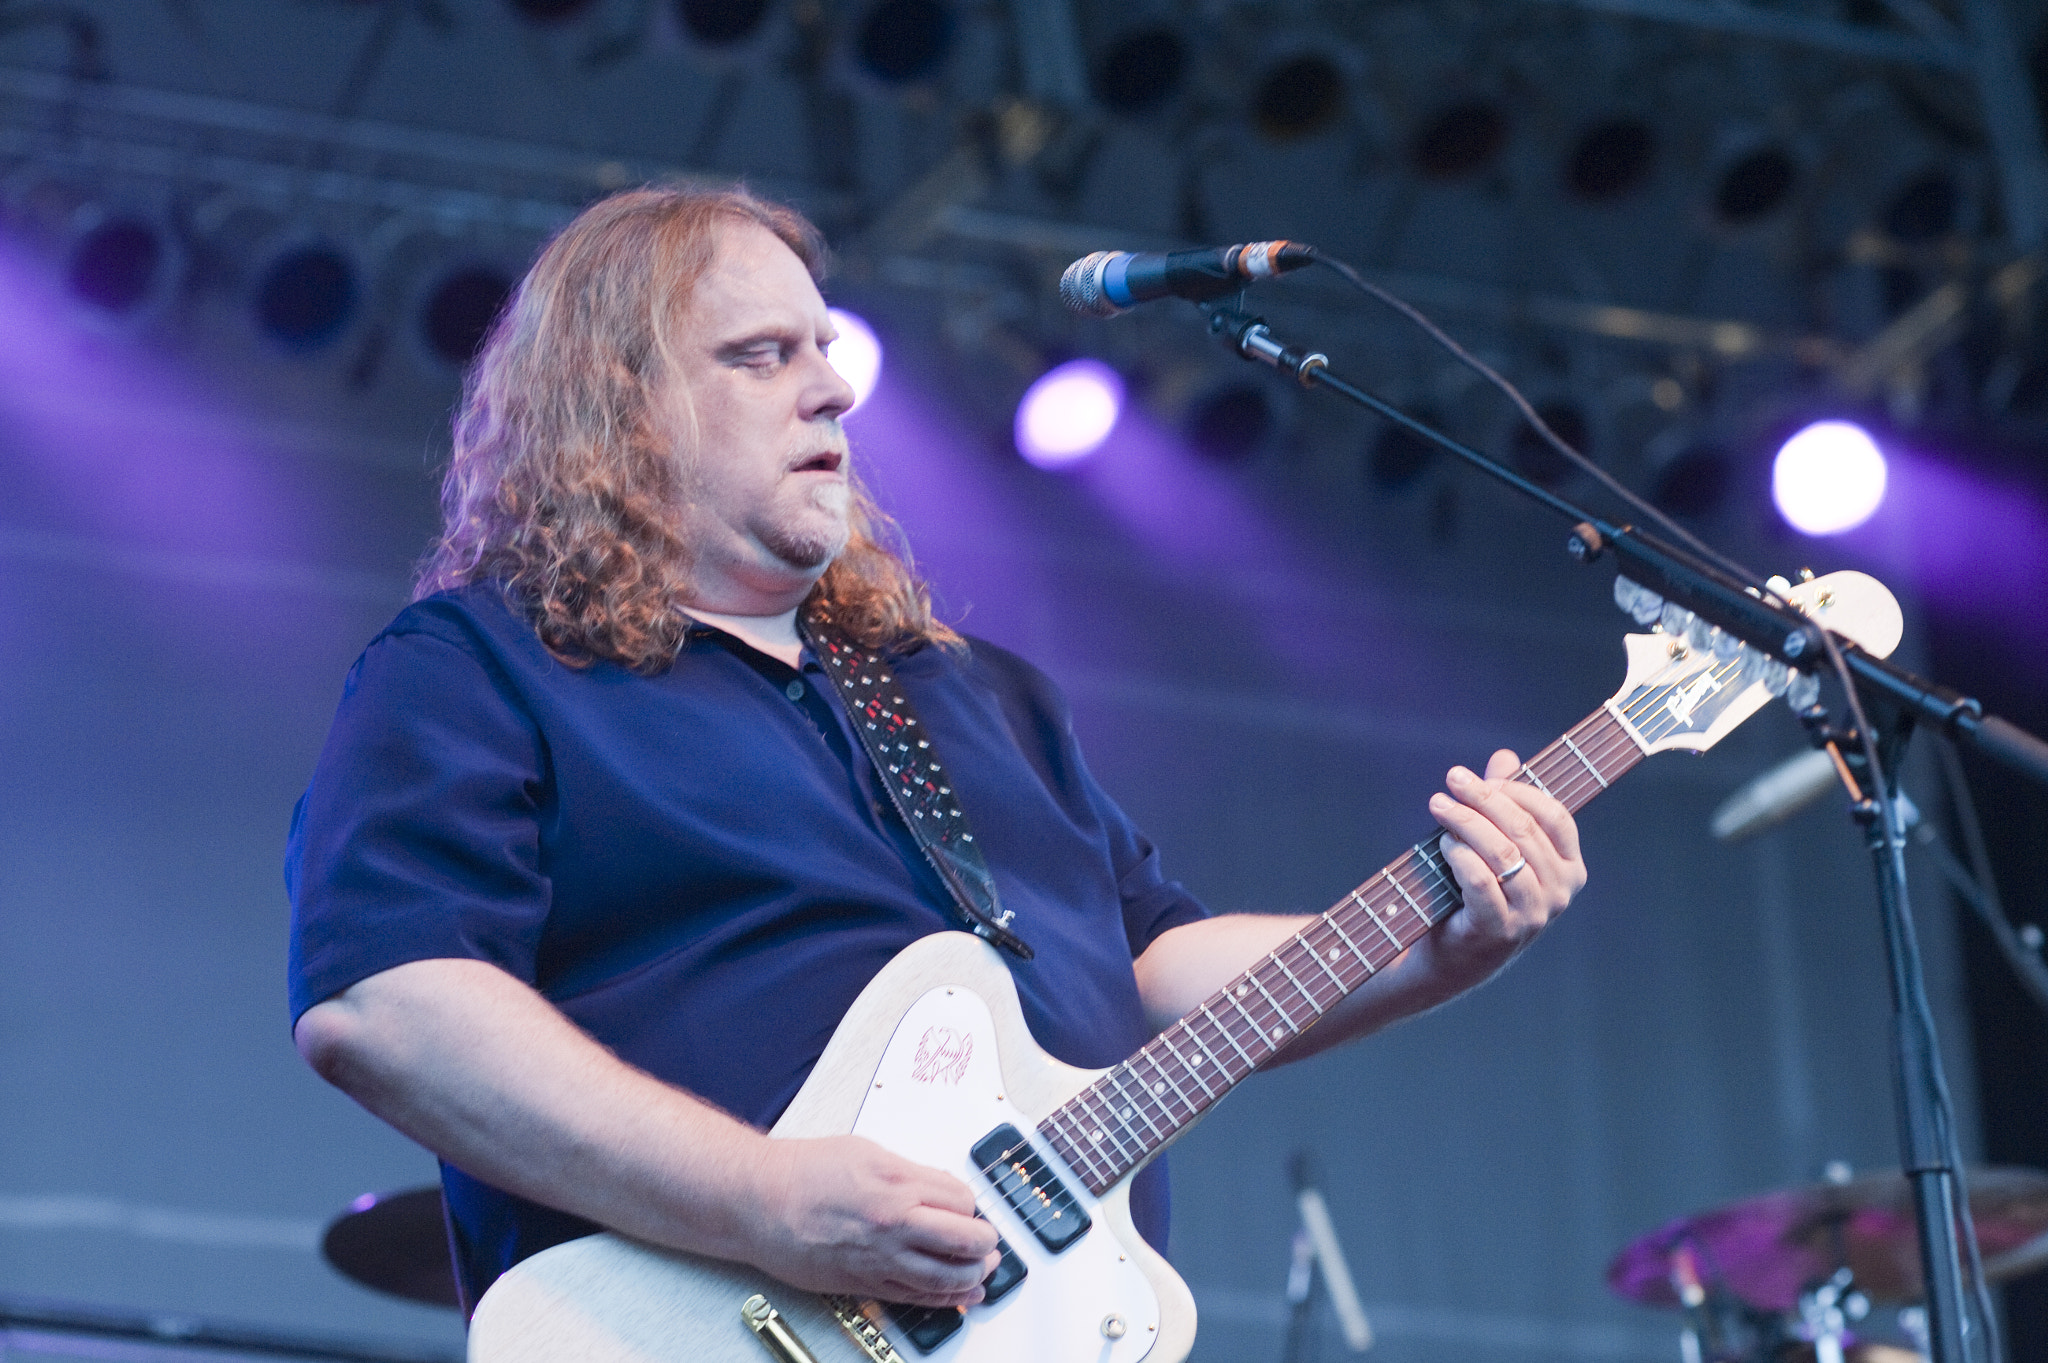 Nikon D700 sample photo. Artscape arts festival, baltimore maryland 
warren haynes of government mule playing guitar on stage photography